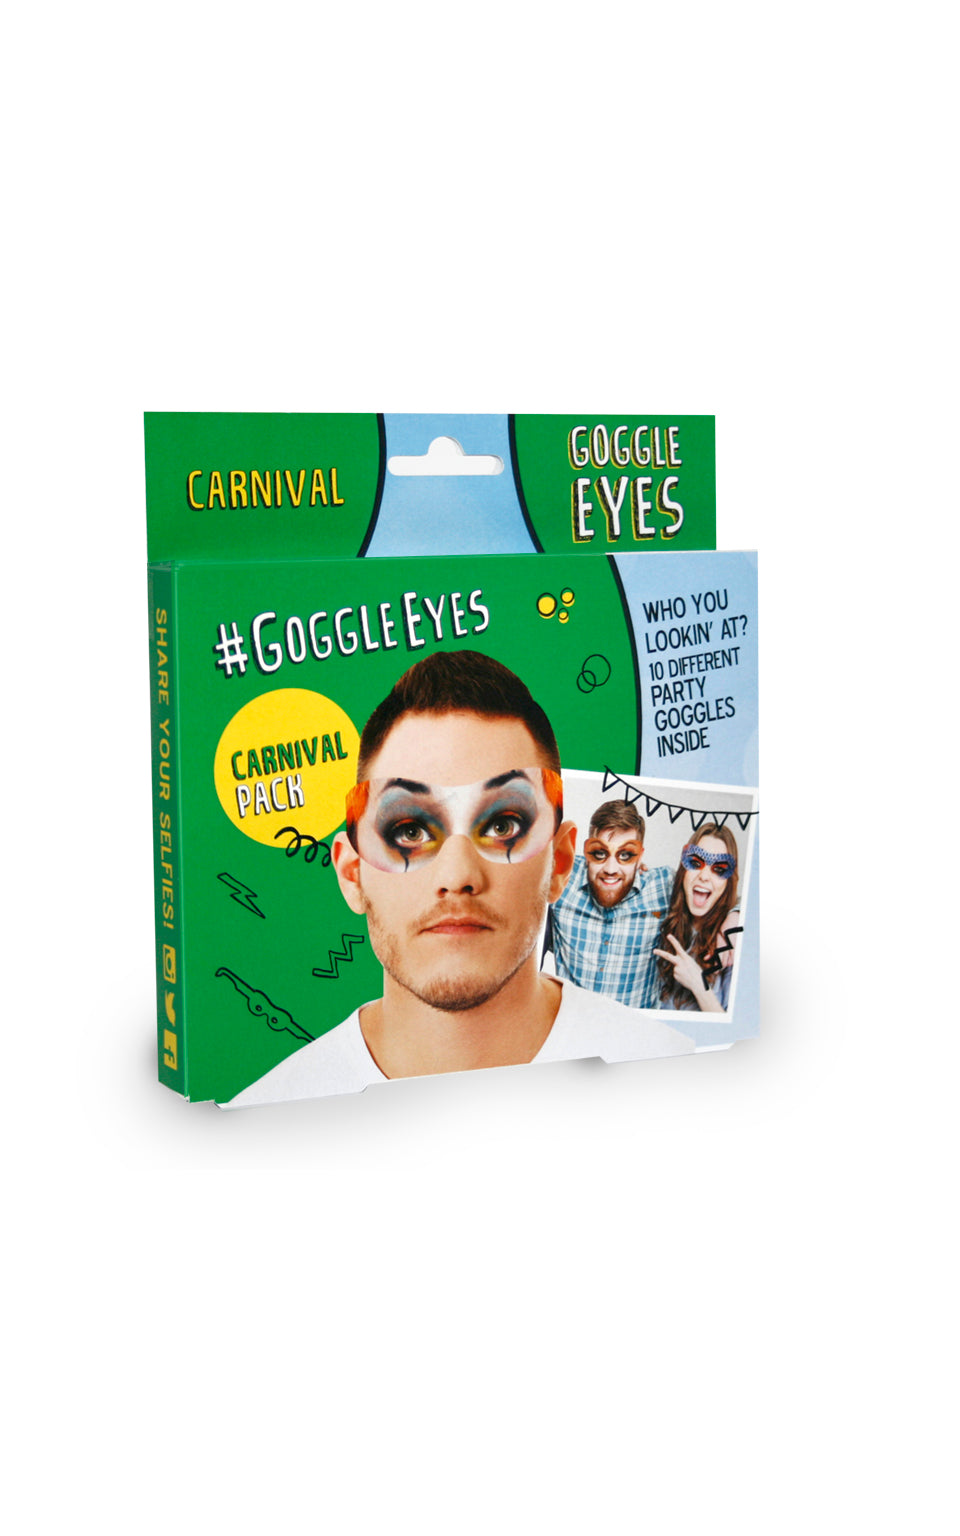 Carnival themed Goggle Eyes. Pack of 10 cardboard glasses with hilarious designs. Perfect for selfies.